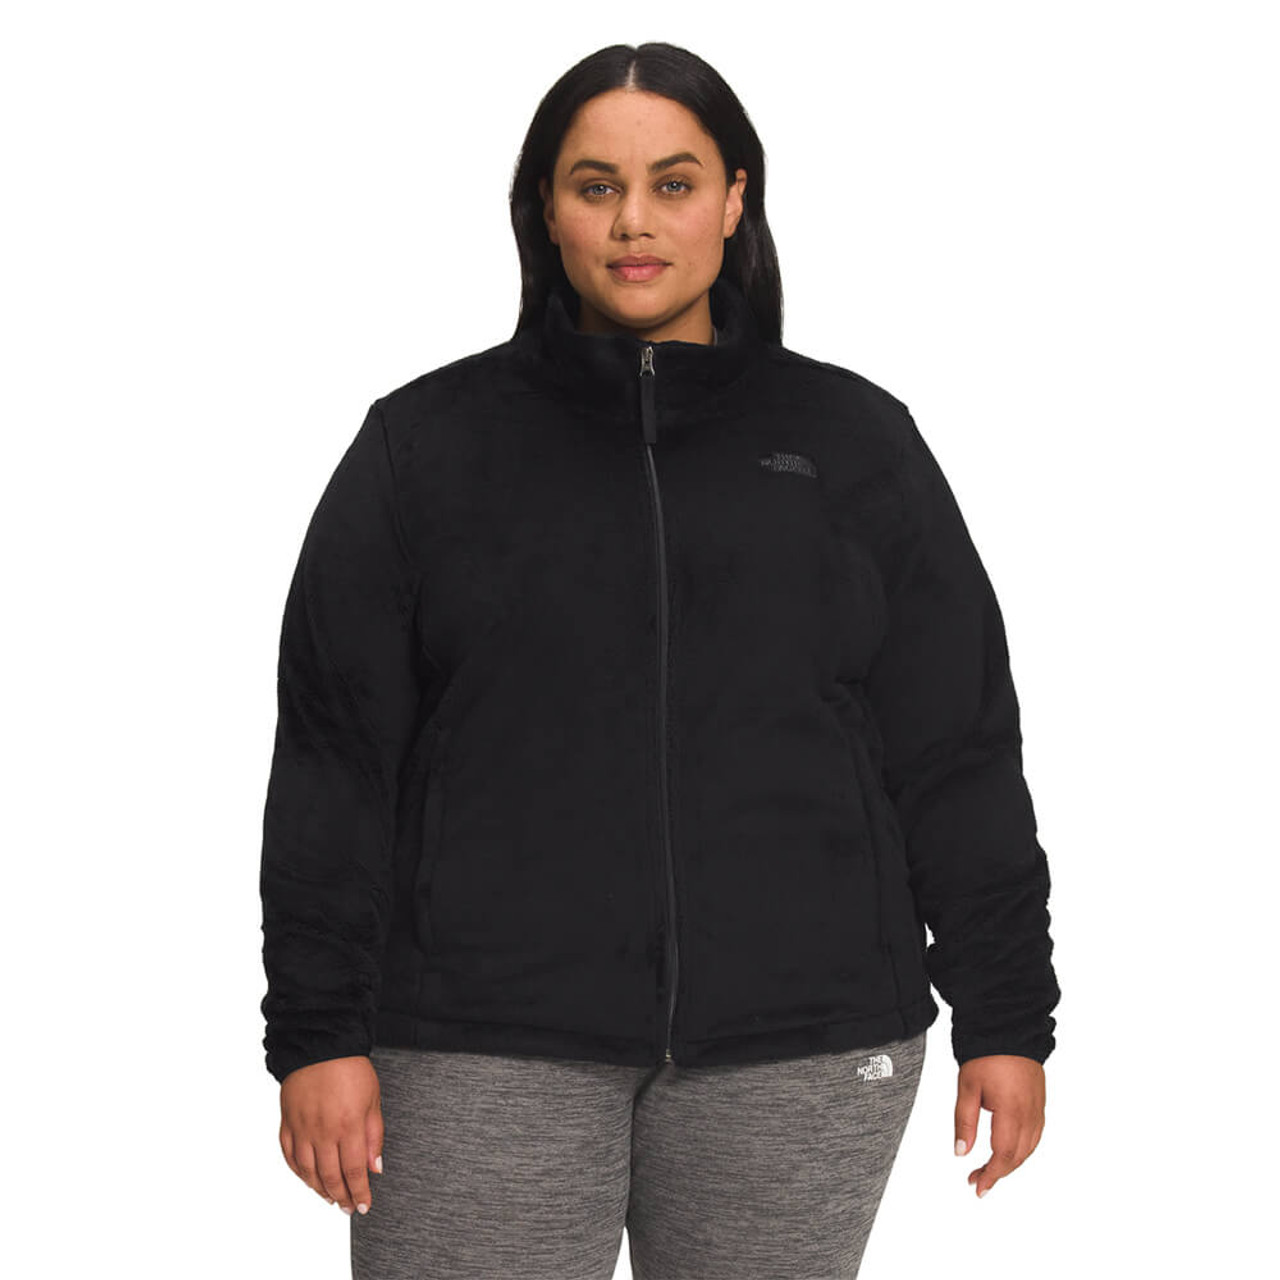 The North Face Osito jacket in black